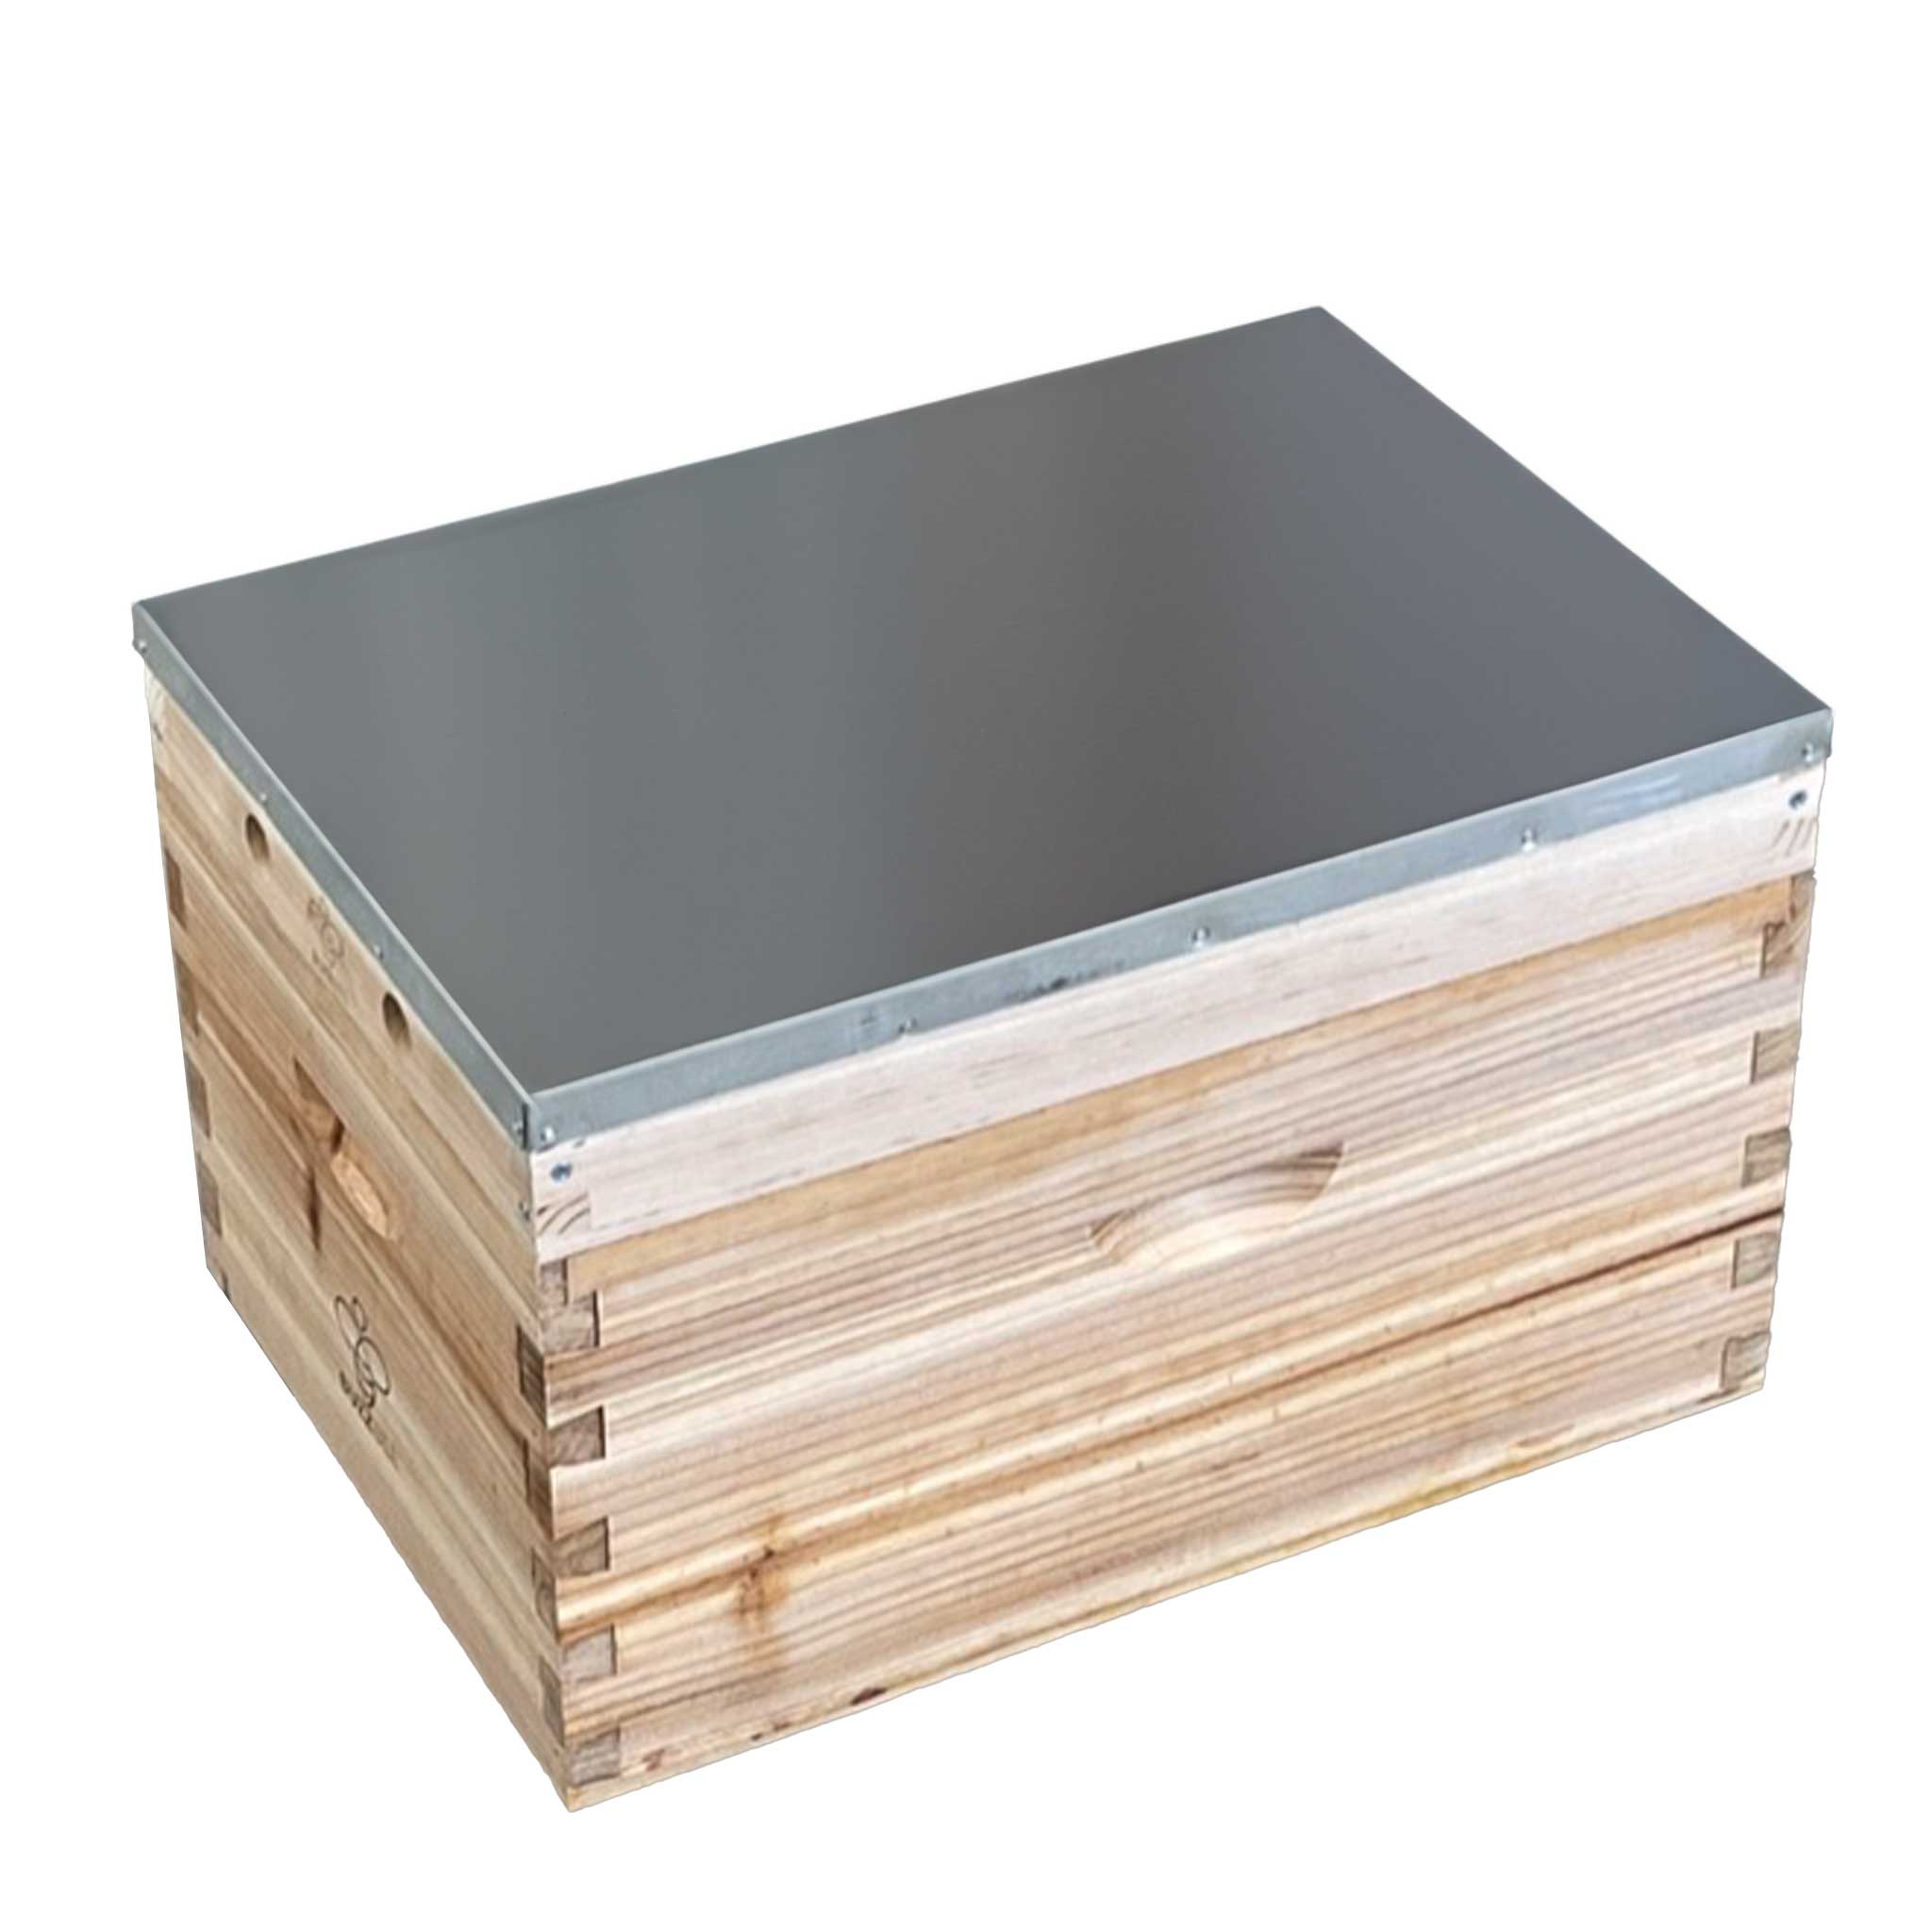 Migratory Lid/Roof/Outer Cover with Galvanised Cover - Hive Parts collection by Buzzbee Beekeeping Supplies